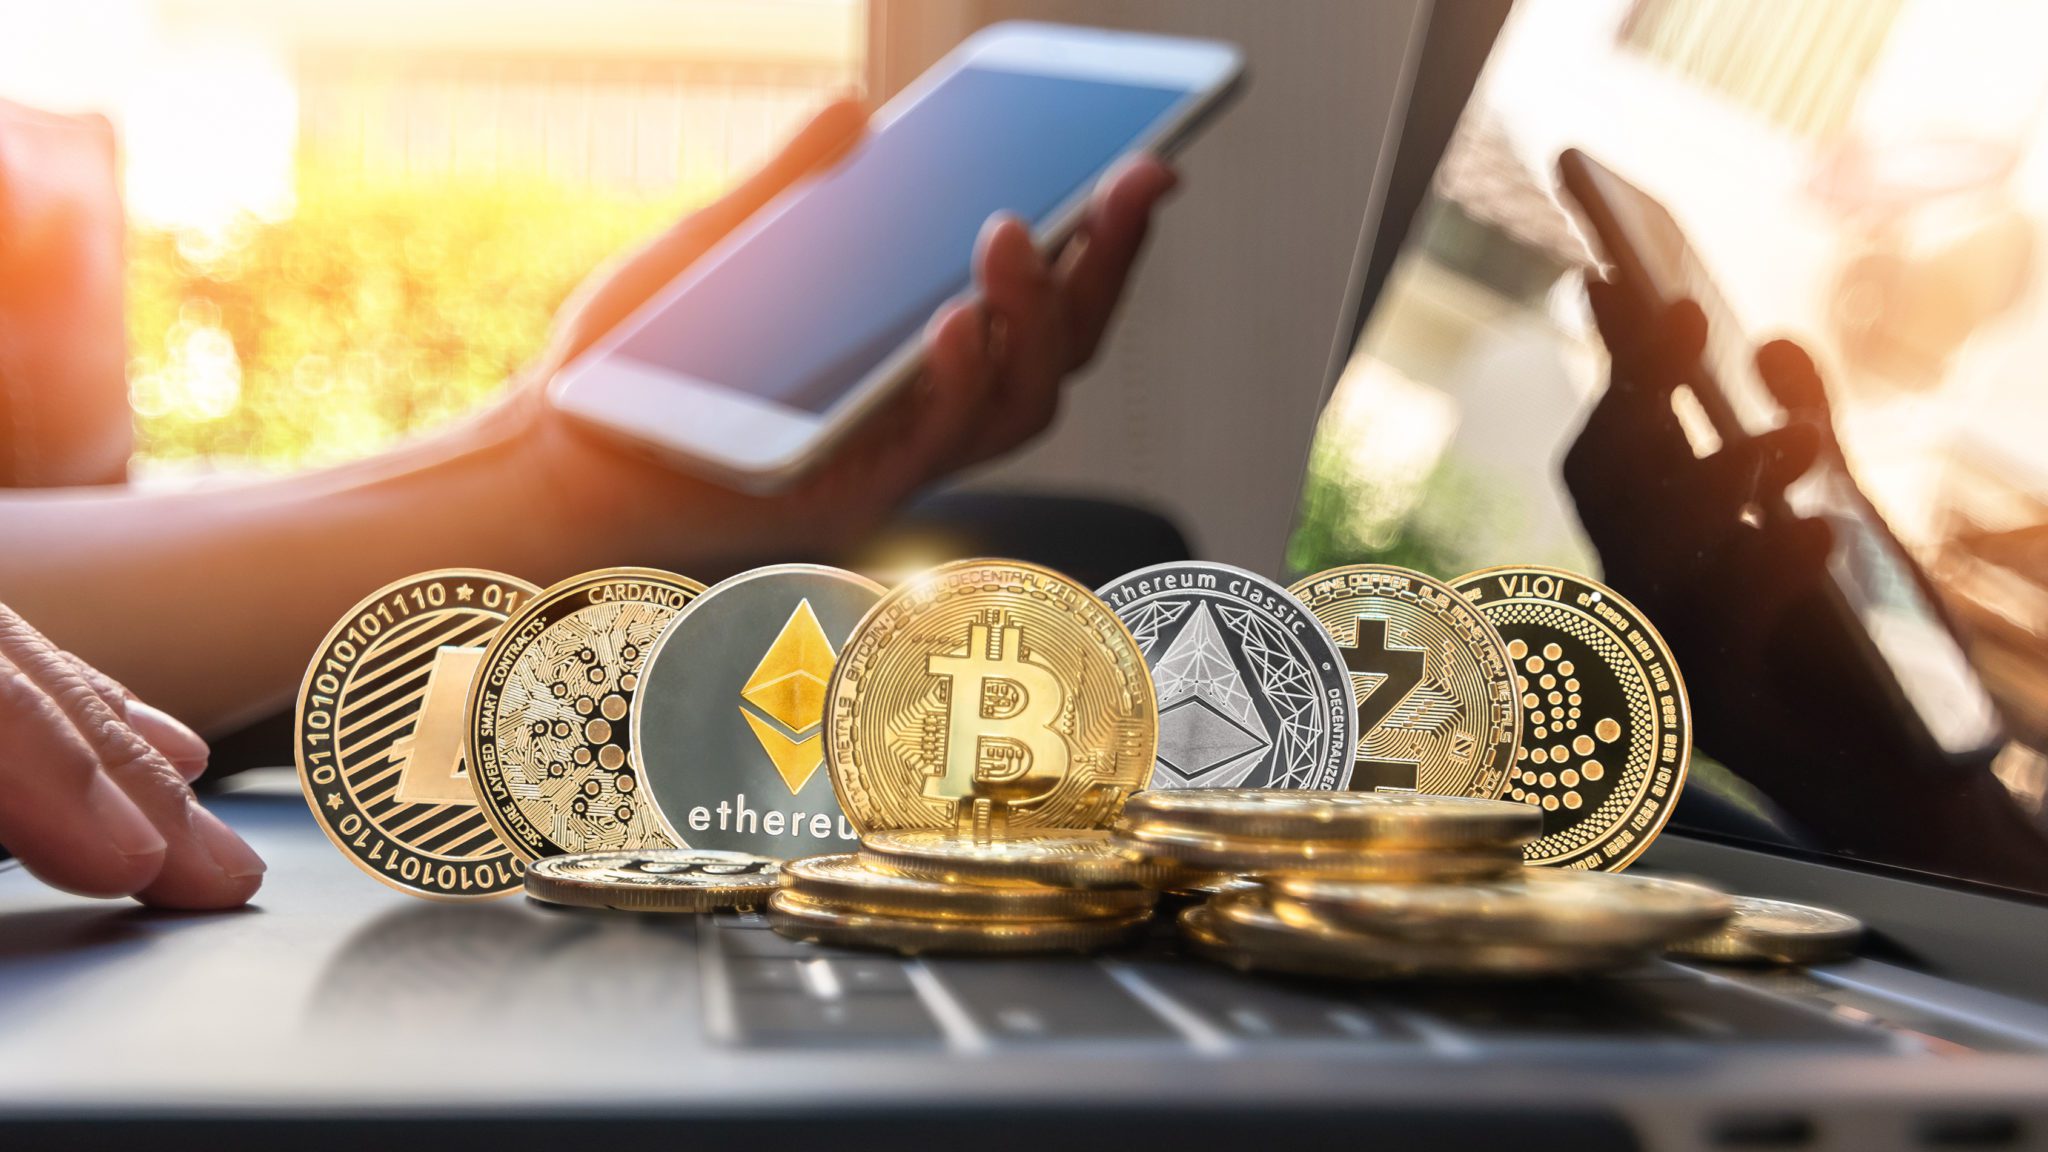 Is Cryptocurrency the Future of Money?